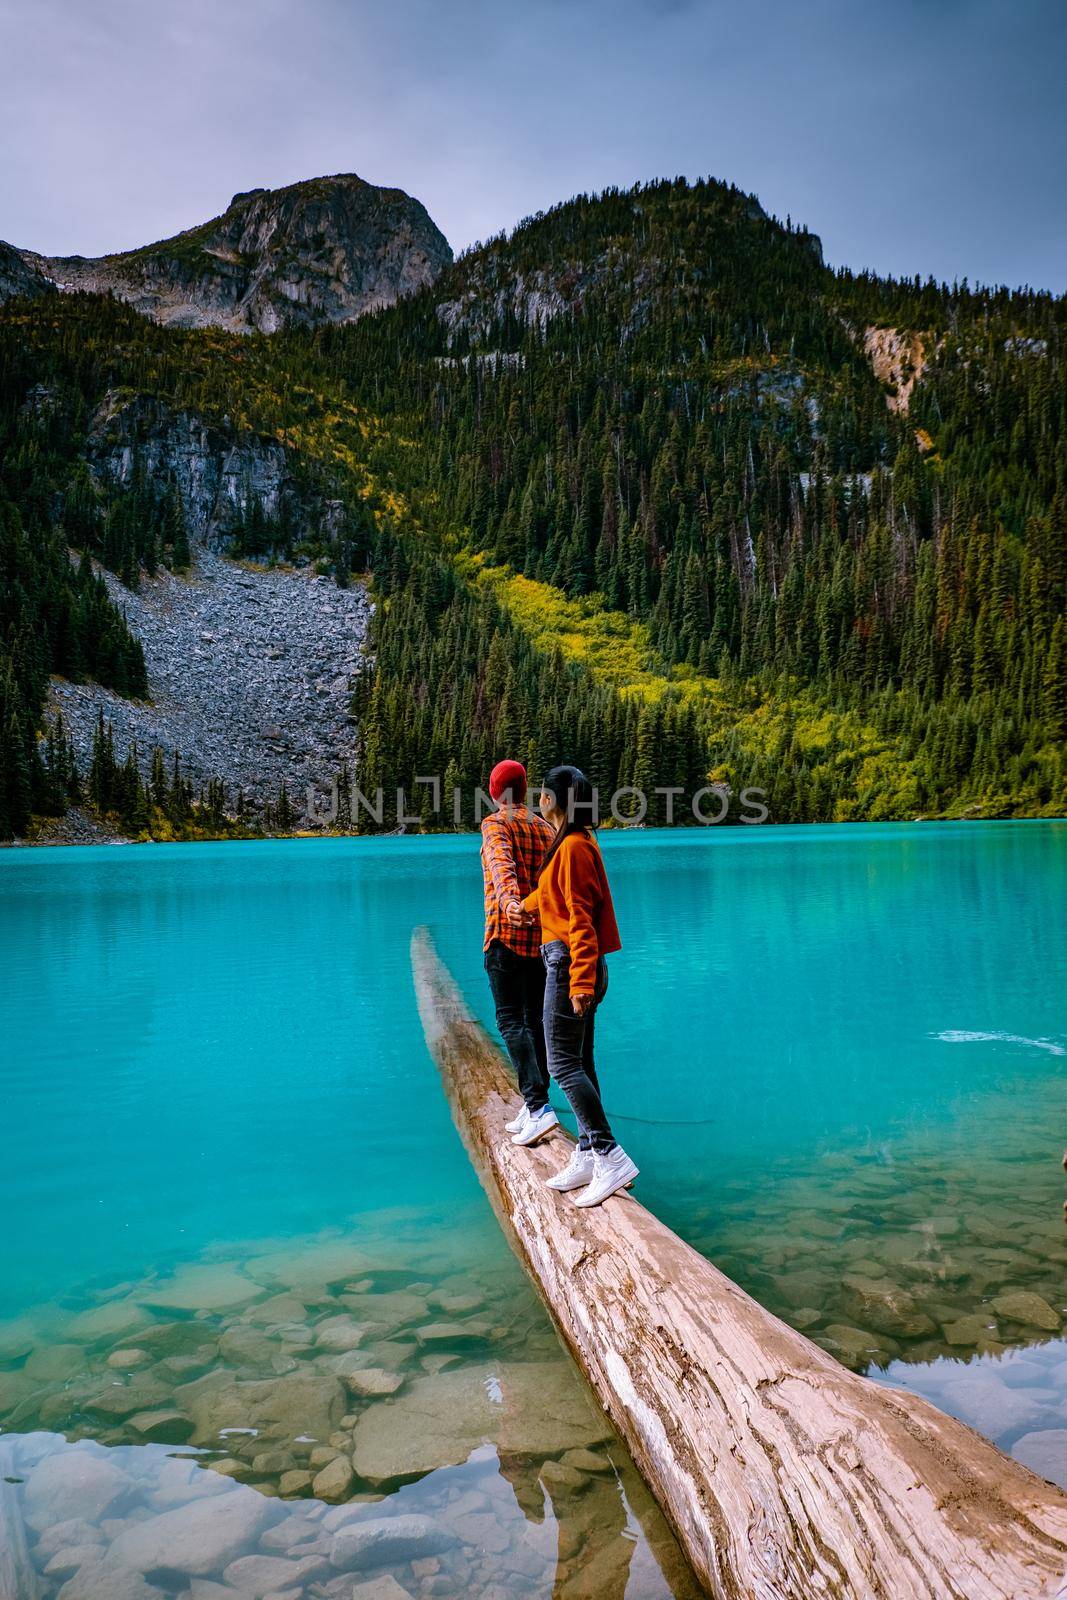 Majestic mountain lake in Canada. Upper Joffre Lake Trail View, couple visit Joffre Lakes Provincial Park - Middle Lake. British Columbia Canada, couple men and woman hiking by the lake